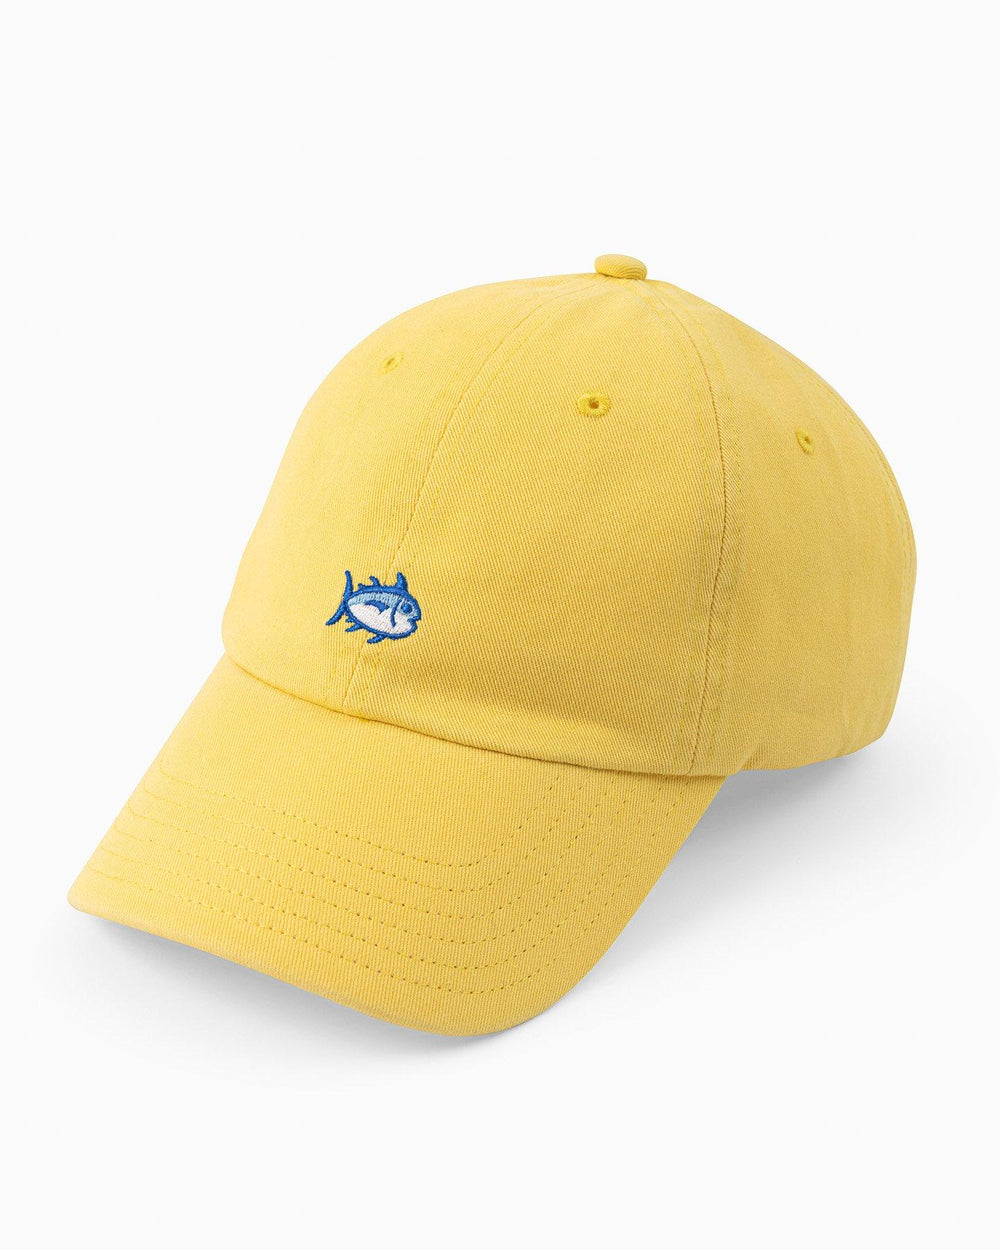 The front of the Skipjack Hat by Southern Tide - Sunshine